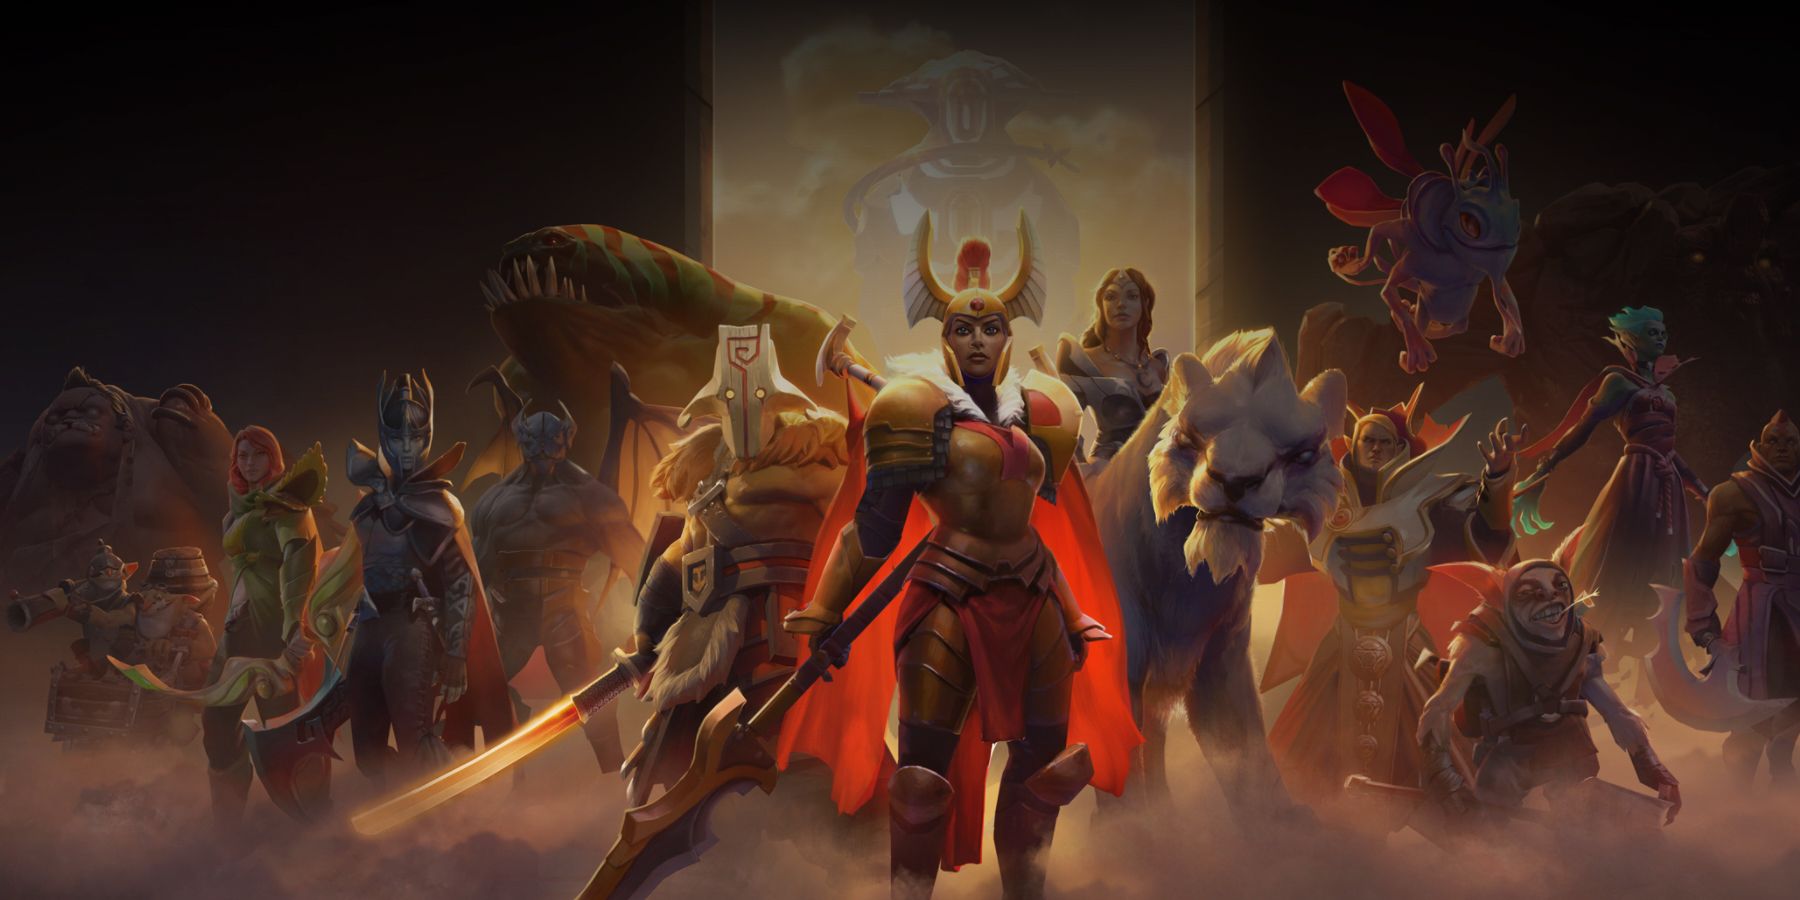 Characters from Dota 2.